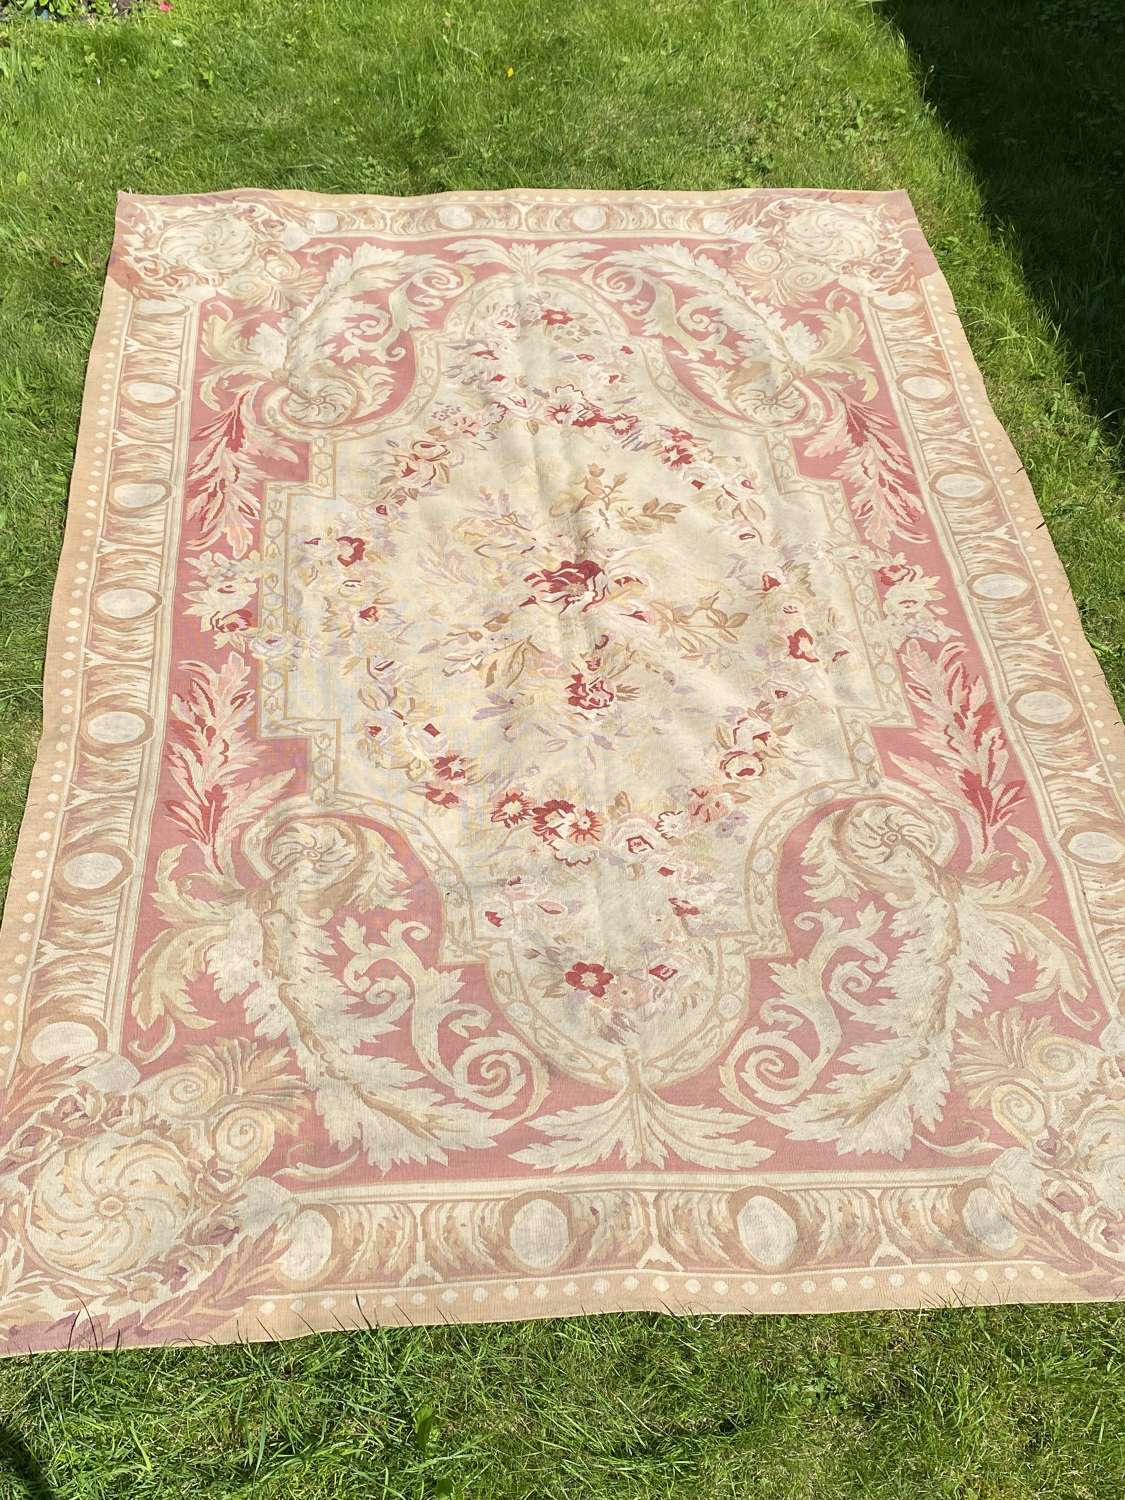 Large Aubusson carpet or tapestry